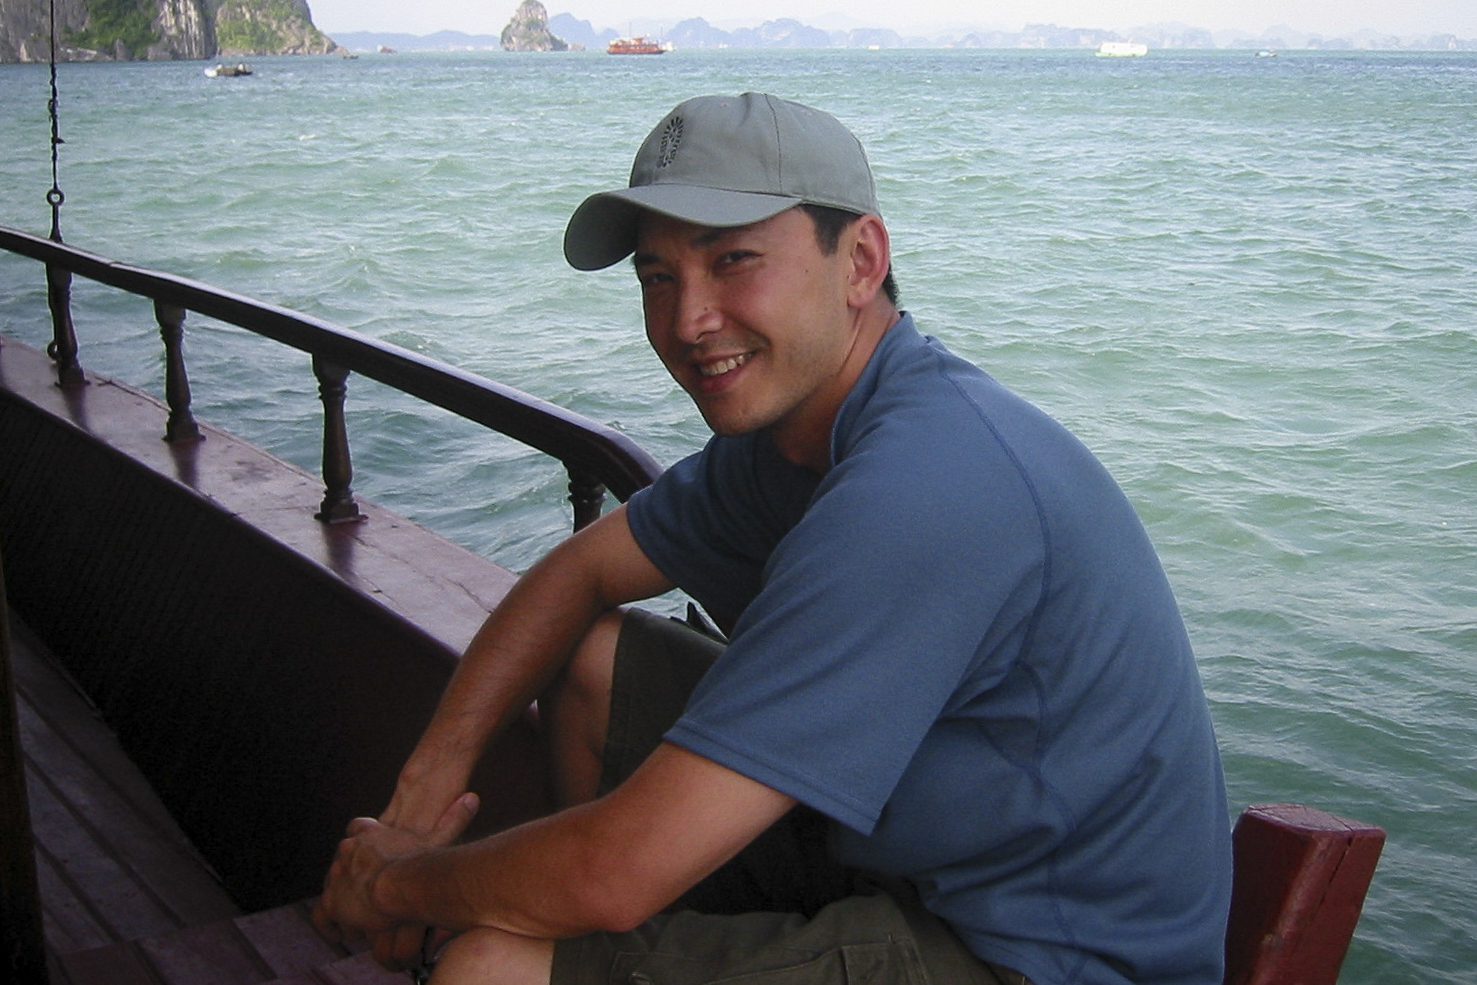 Viet Thanh Nguyen in Ha Long Bay on a red boat wearing a blue hat